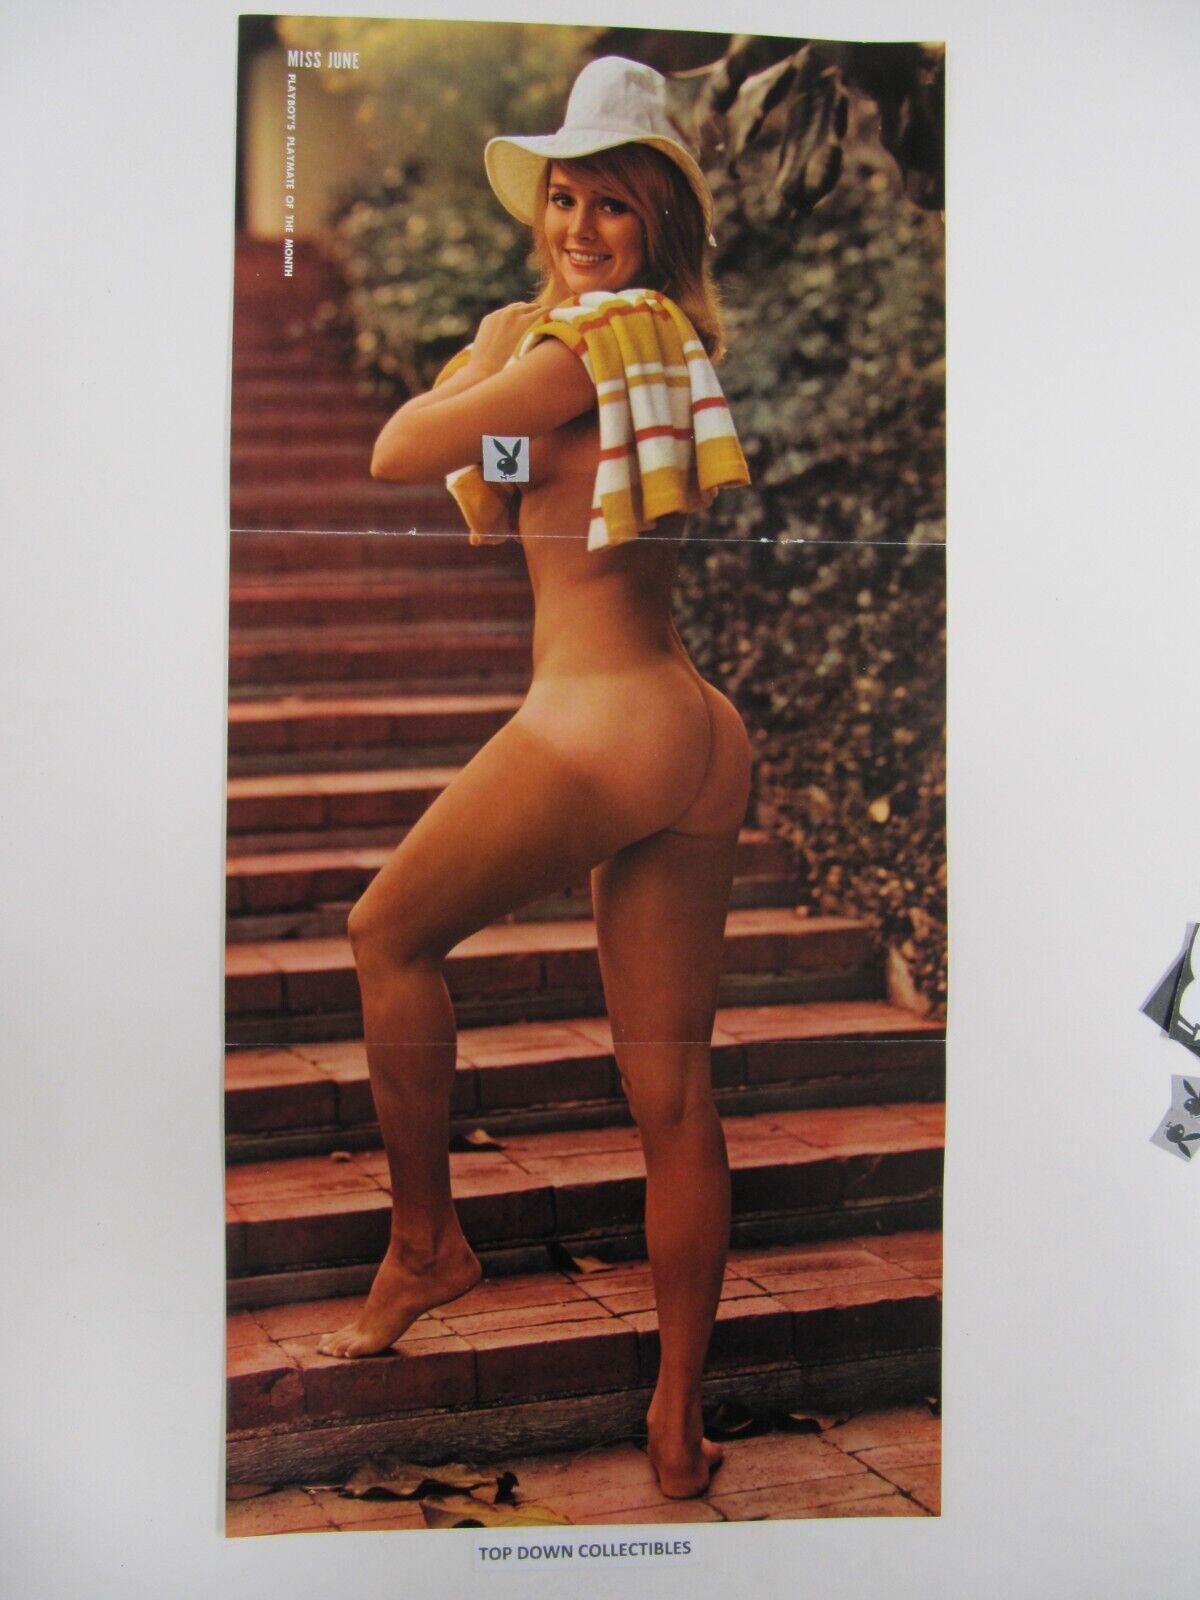 Best of Playboy centerfolds of the 70s